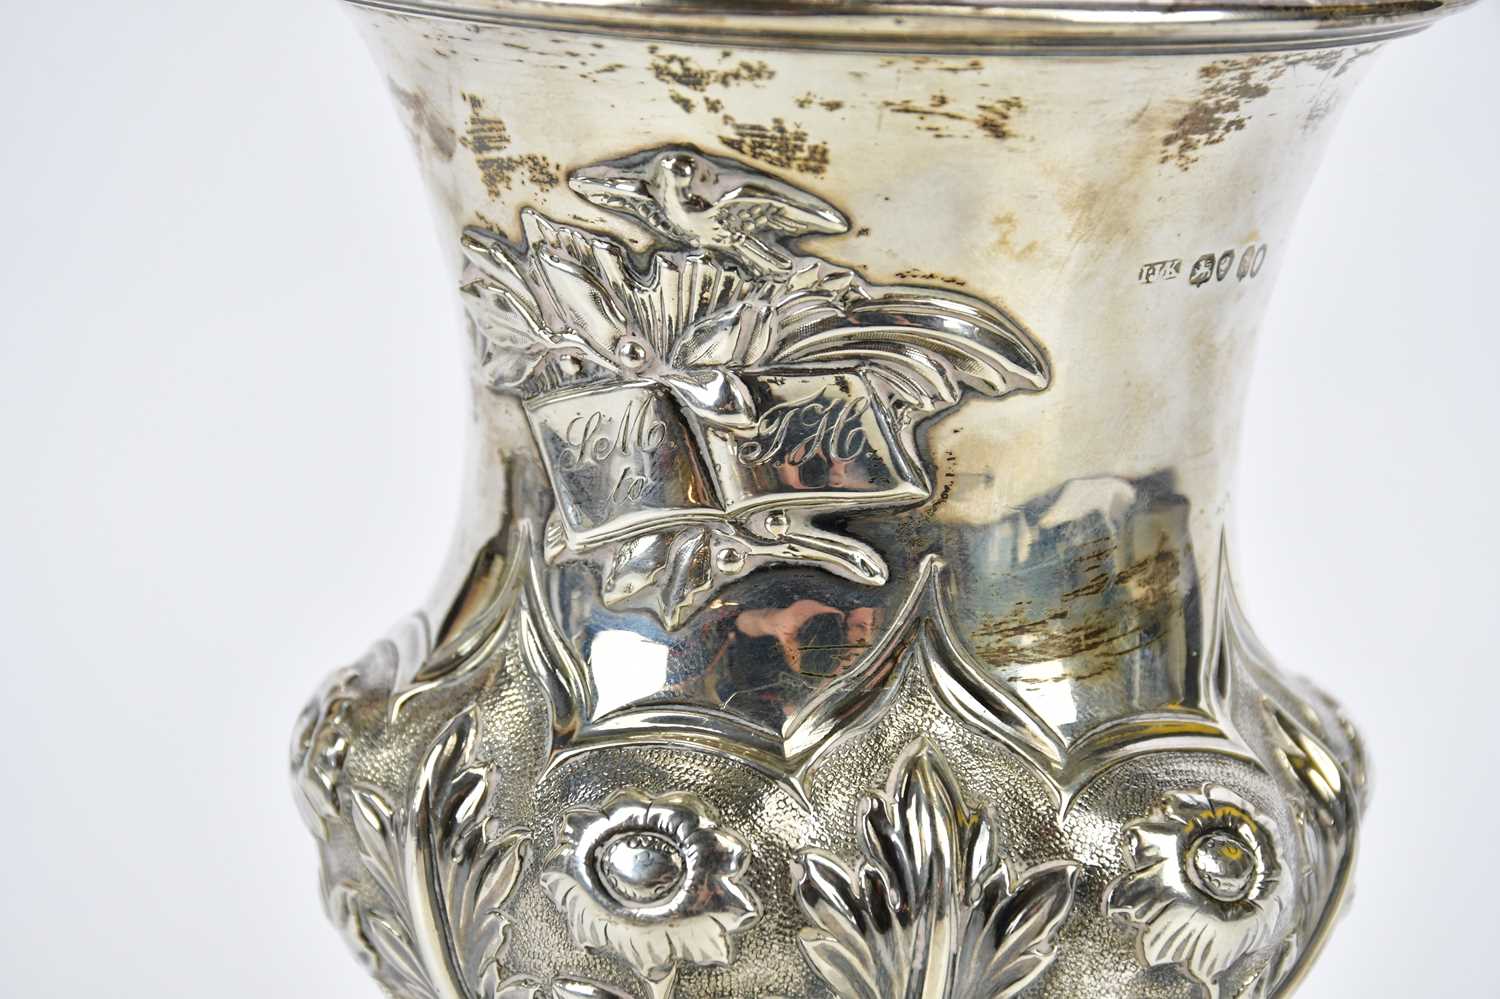 JOHN JAMES KEITH; a William IV hallmarked silver goblet with embossed floral decoration, London - Image 2 of 4